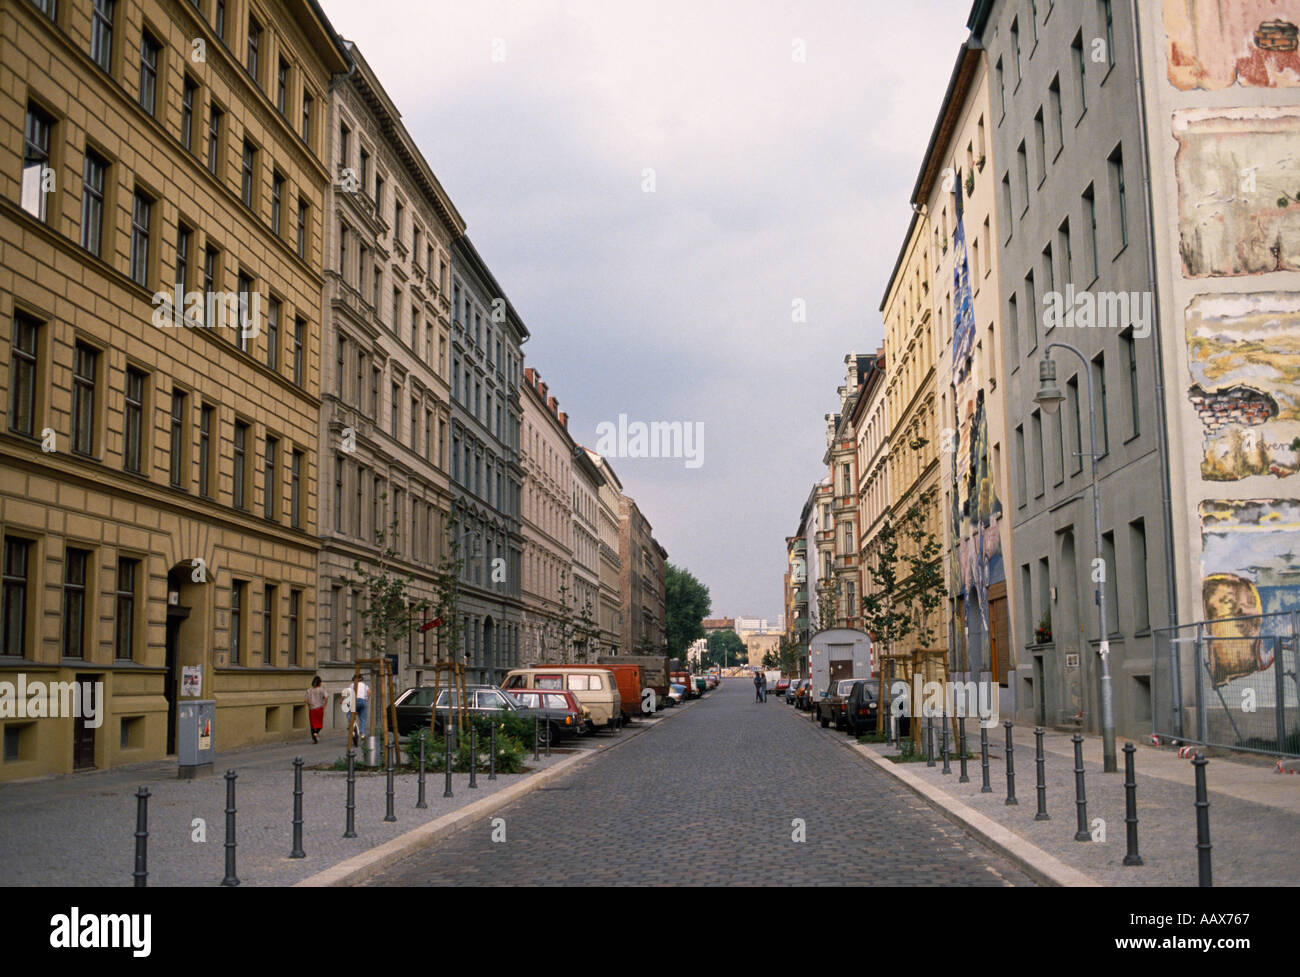 Cold War Kreuzberg West Berlin in West Germany in Europe. Architecture  Building Perspective Urban Housing House Terraced Lifestyle Life Travel  Stock Photo - Alamy